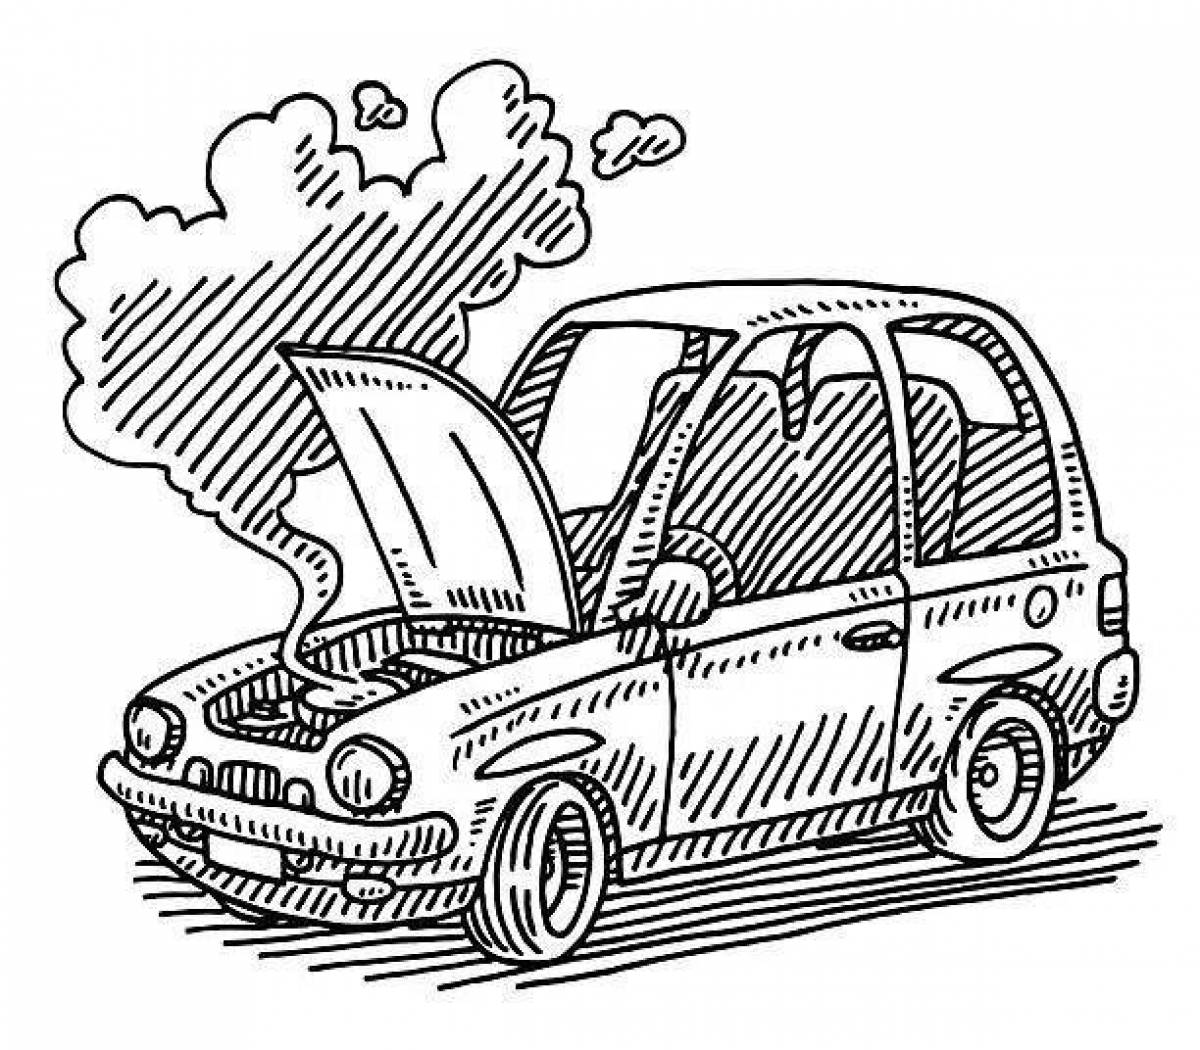 Coloring pages of broken cars